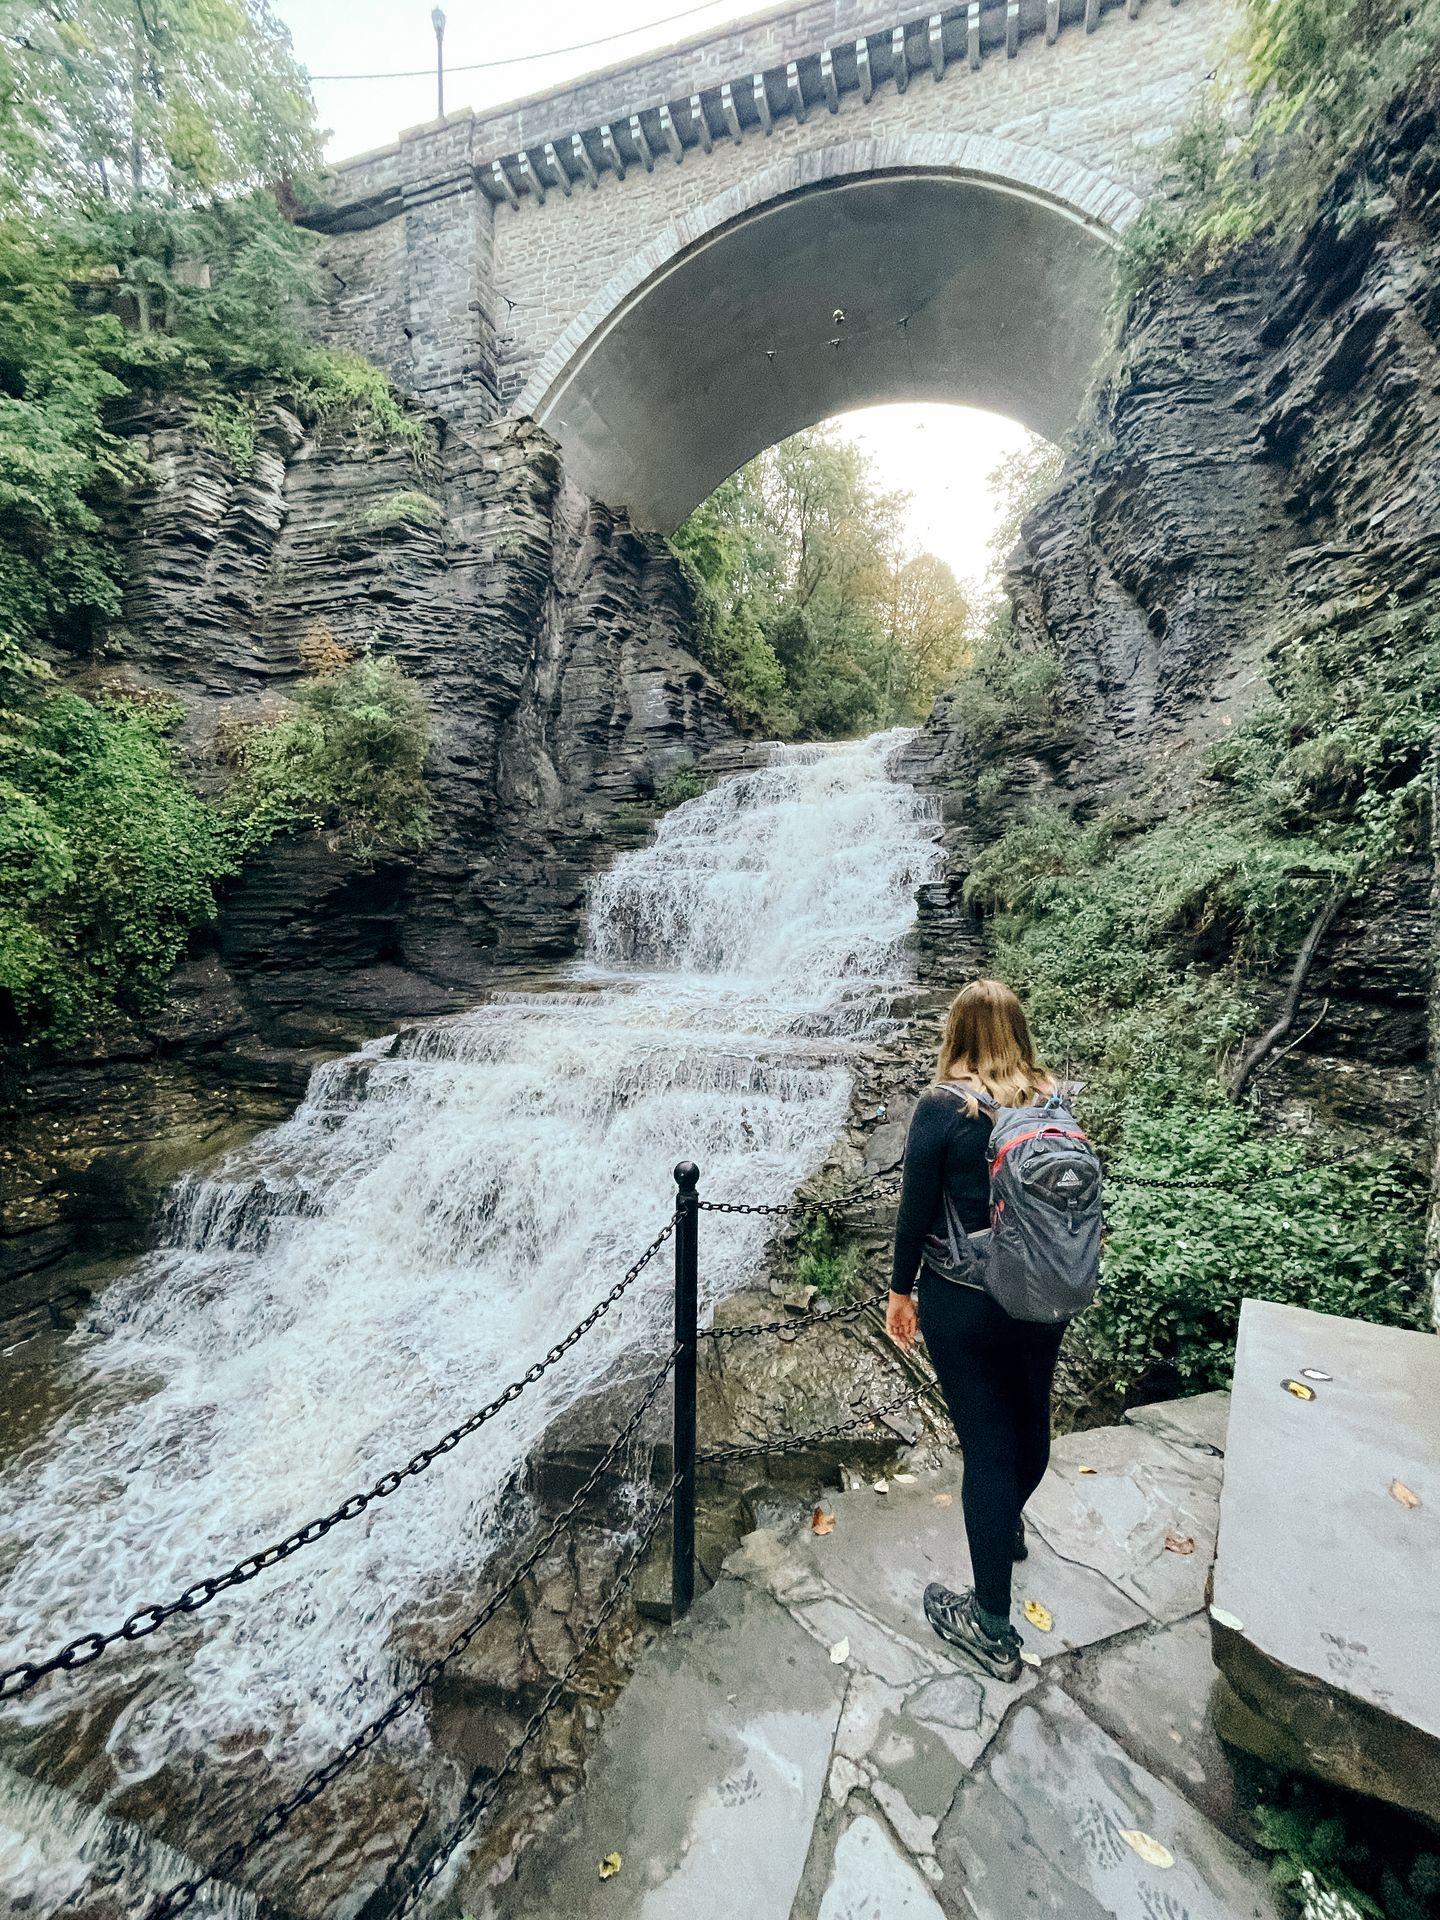 Lydia looking at a waterfall with a bridge above it in Ithaca, New York